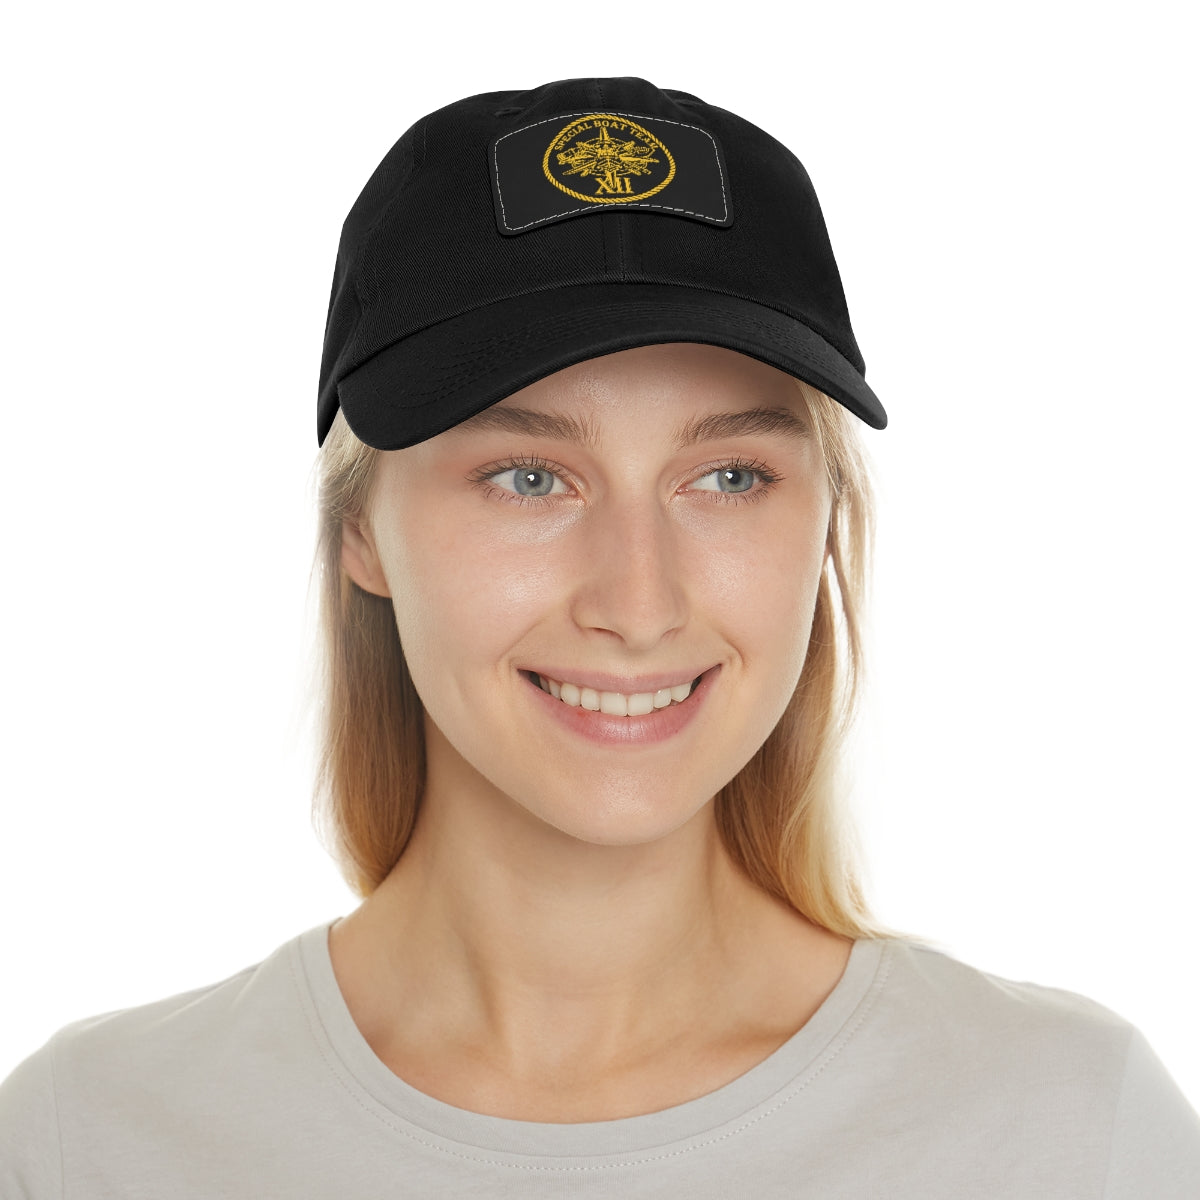 SBT 12 v2 Hat with Leather Patch (Gold)